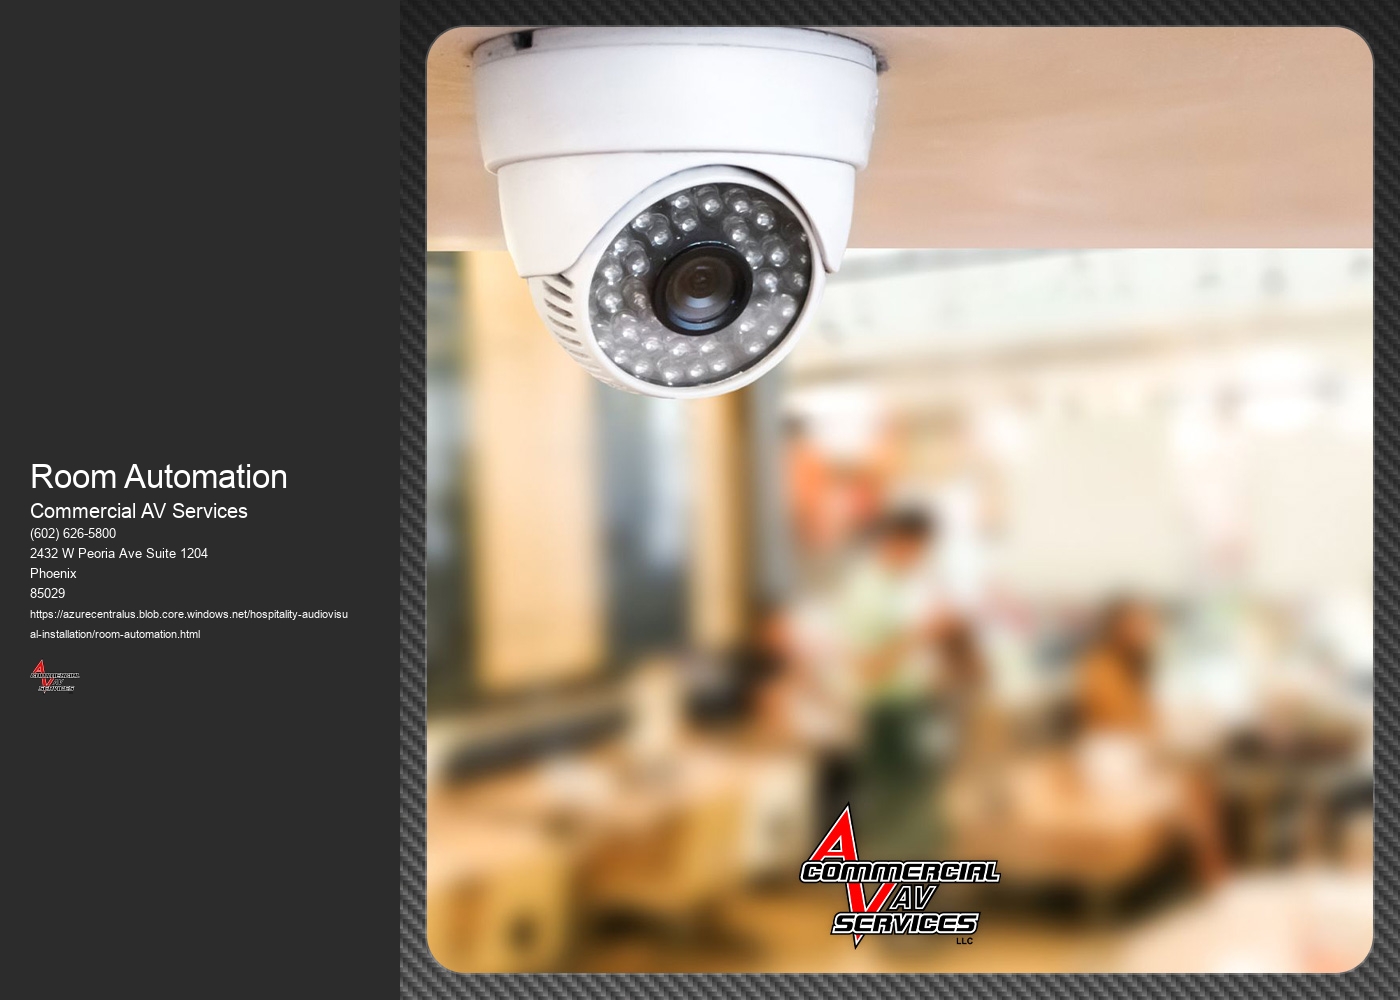 What are the security measures in place to protect room automation systems from unauthorized access or hacking?